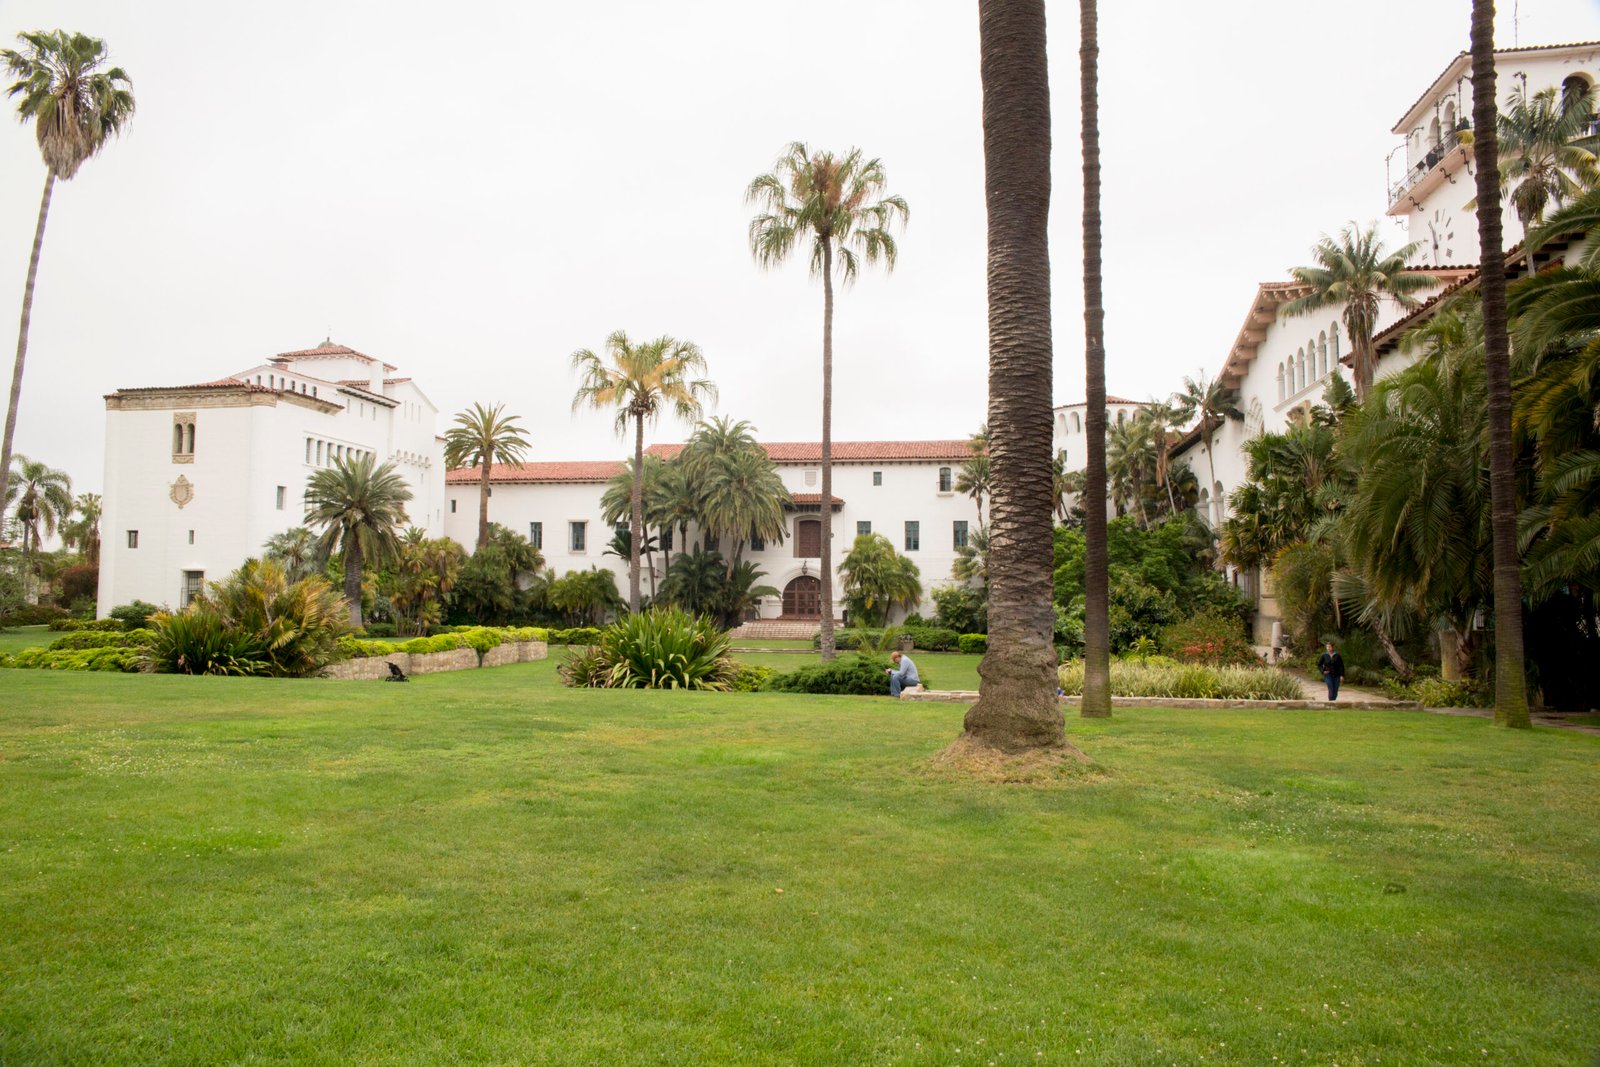 View of the Santa Barbara Courthouse from the Sunken Gardens